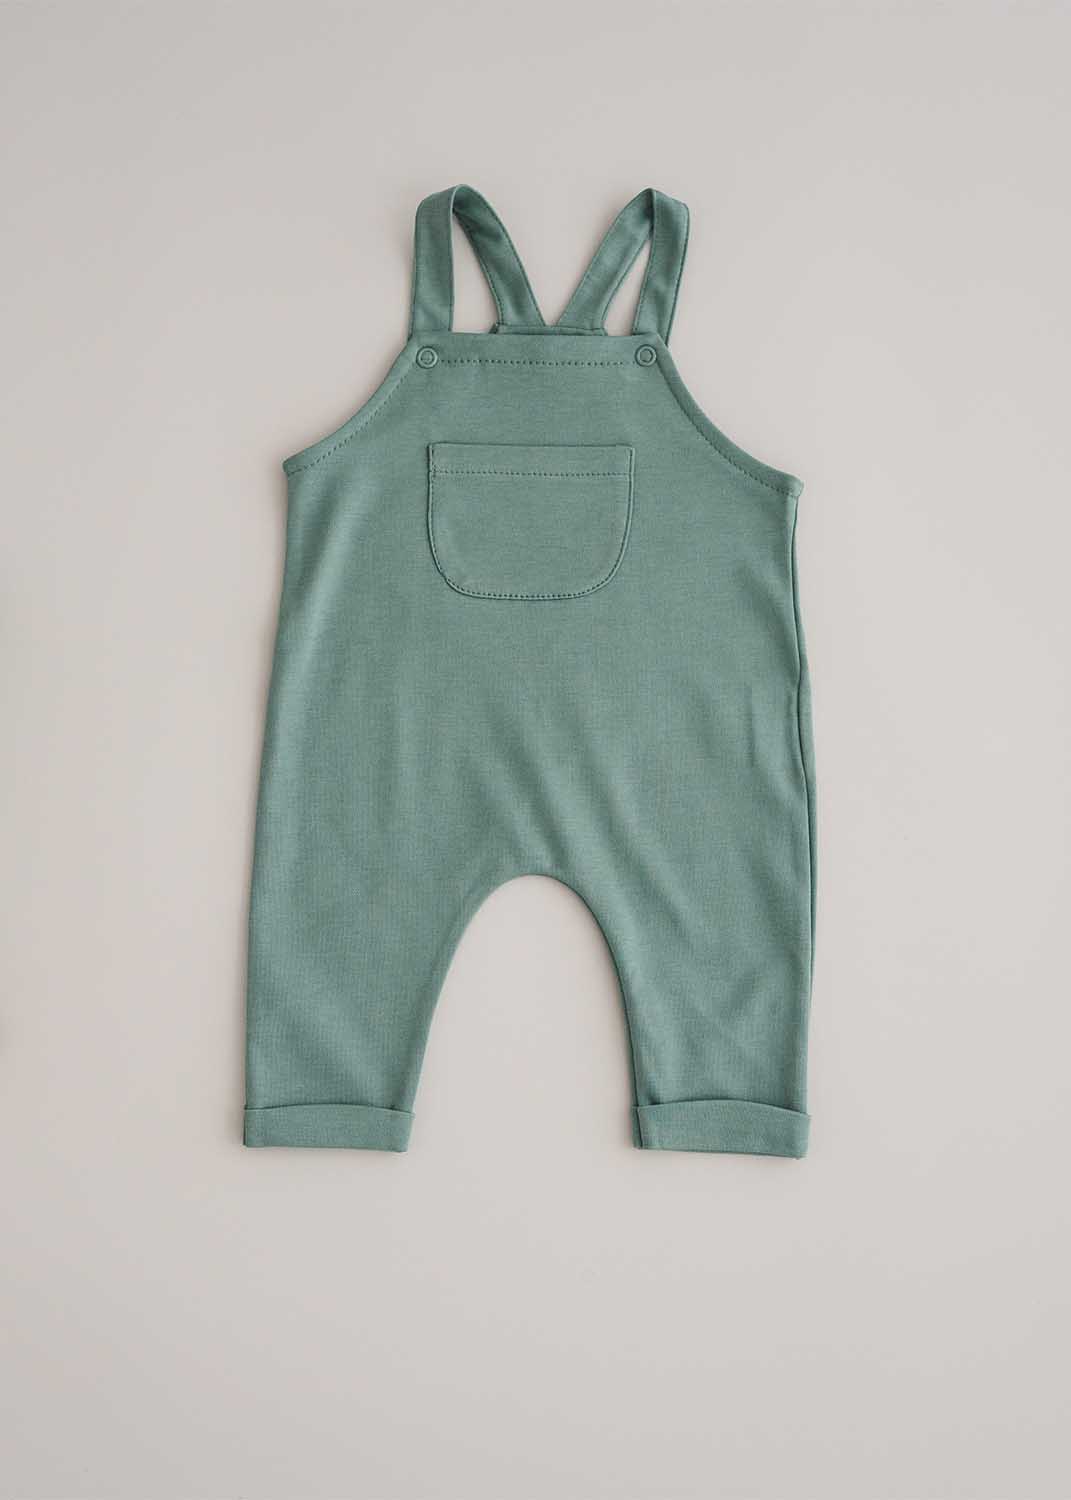 Green dungarees for babies in super soft organic PIMA cotton